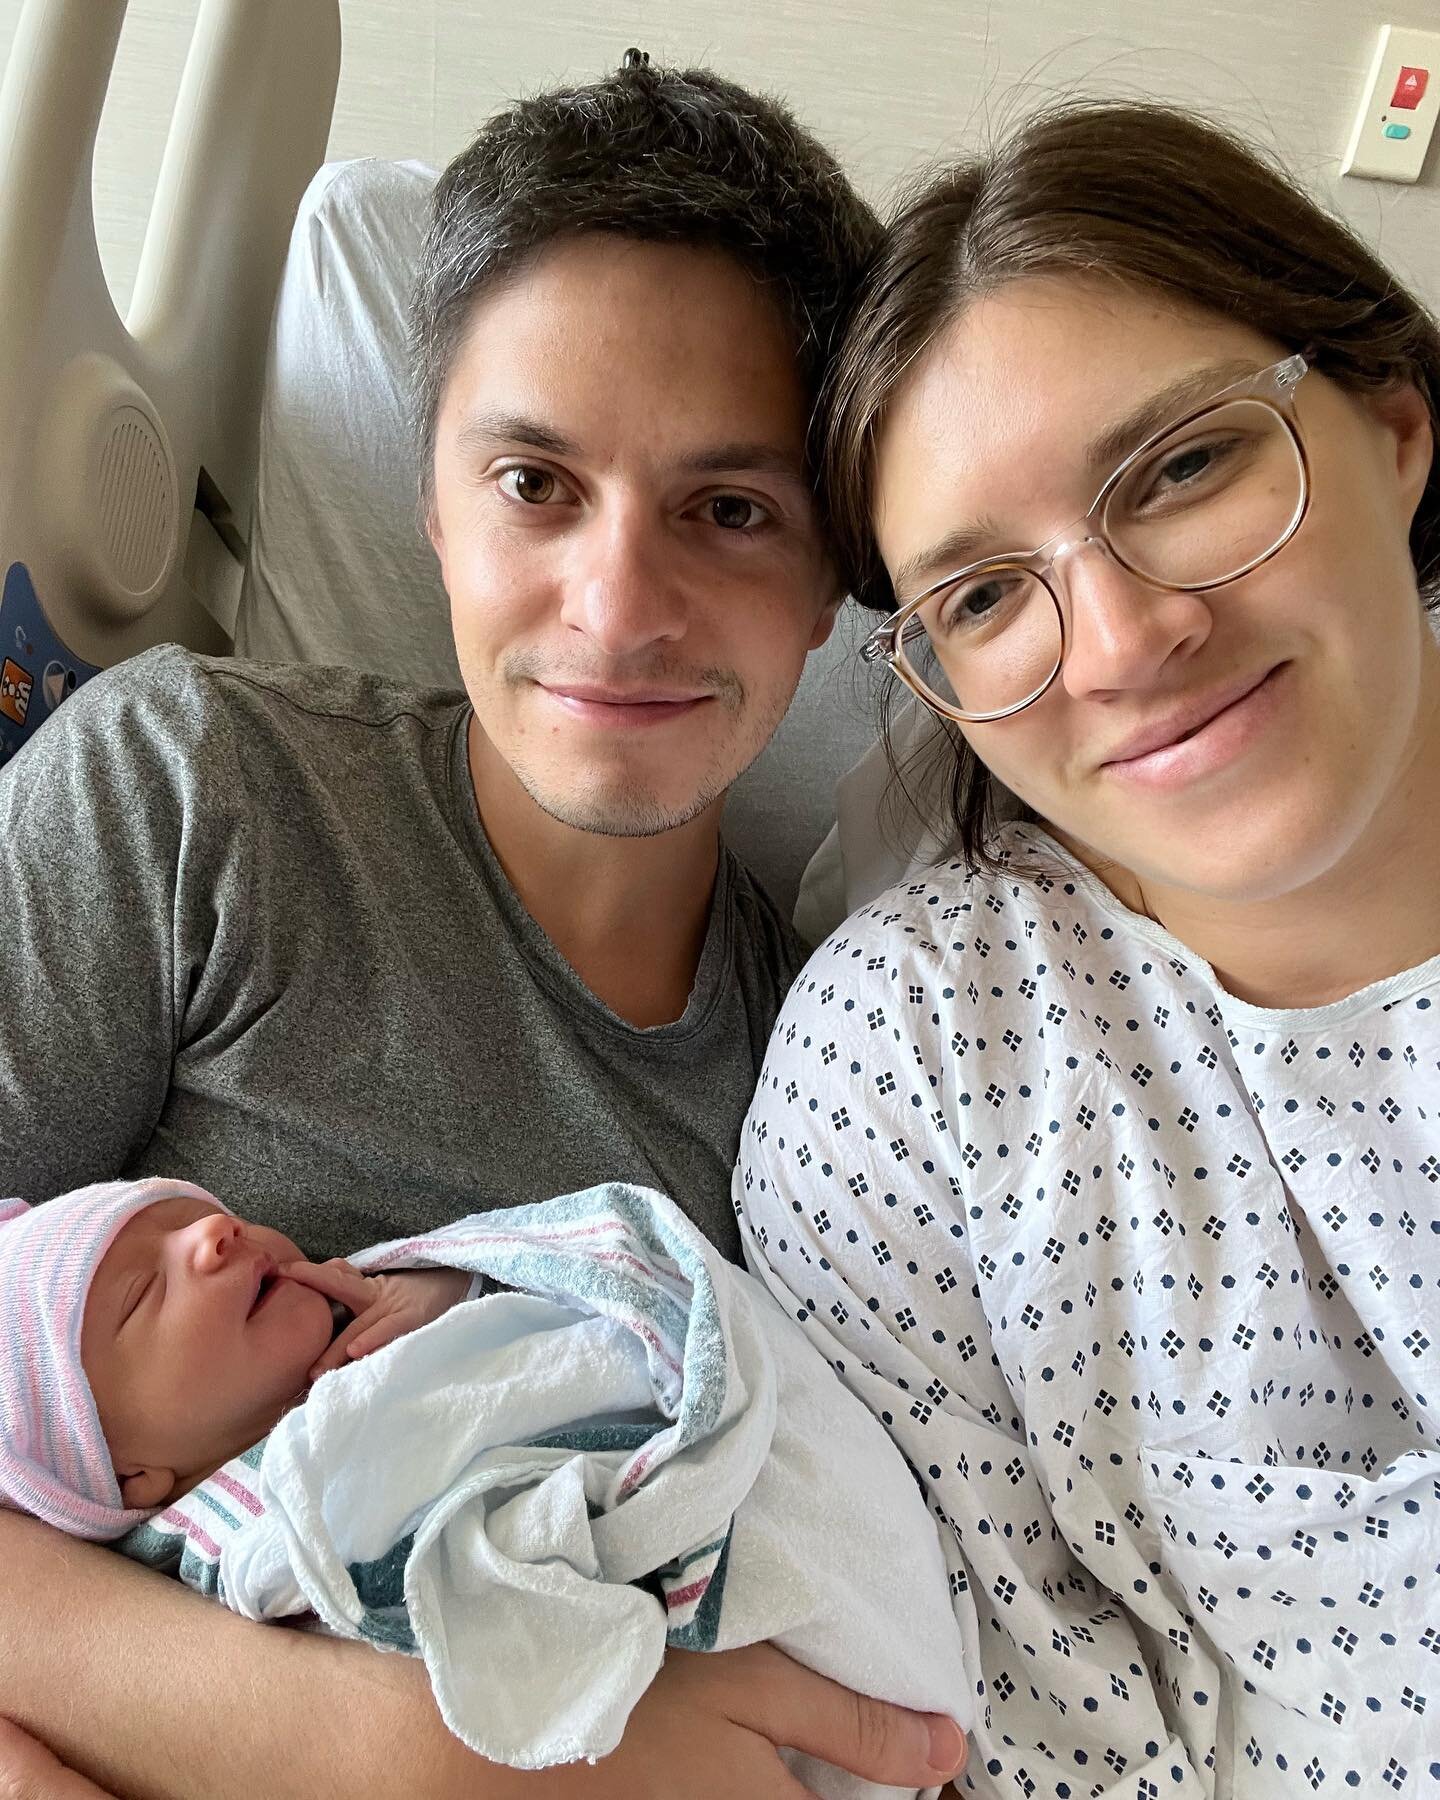 Hello good people of the internet! 

Sorry for the radio silence for awhile&mdash;it has been quite a busy year! Chris and his wife Caroline had their first child Lucy Carina on September 8th. Brian got married and is expecting a son with his wife Ta